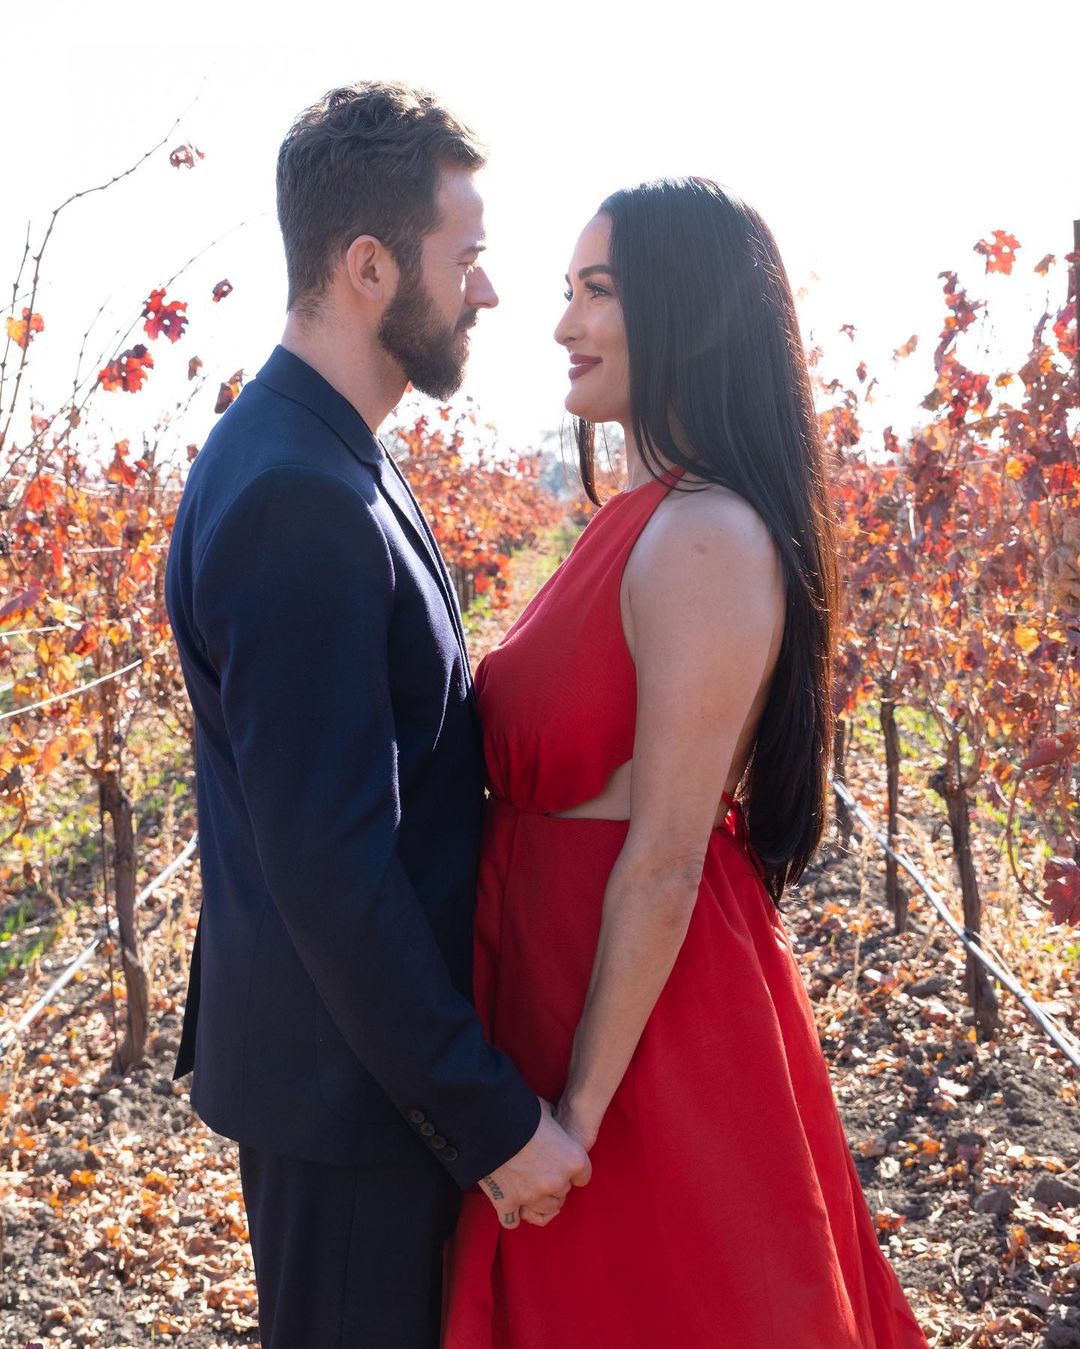 A gorgeous photo taken in a filed filled with dried leaves, shows Artem Chigvintsev and Nikki Bella in a romantic pose and they look awesome.